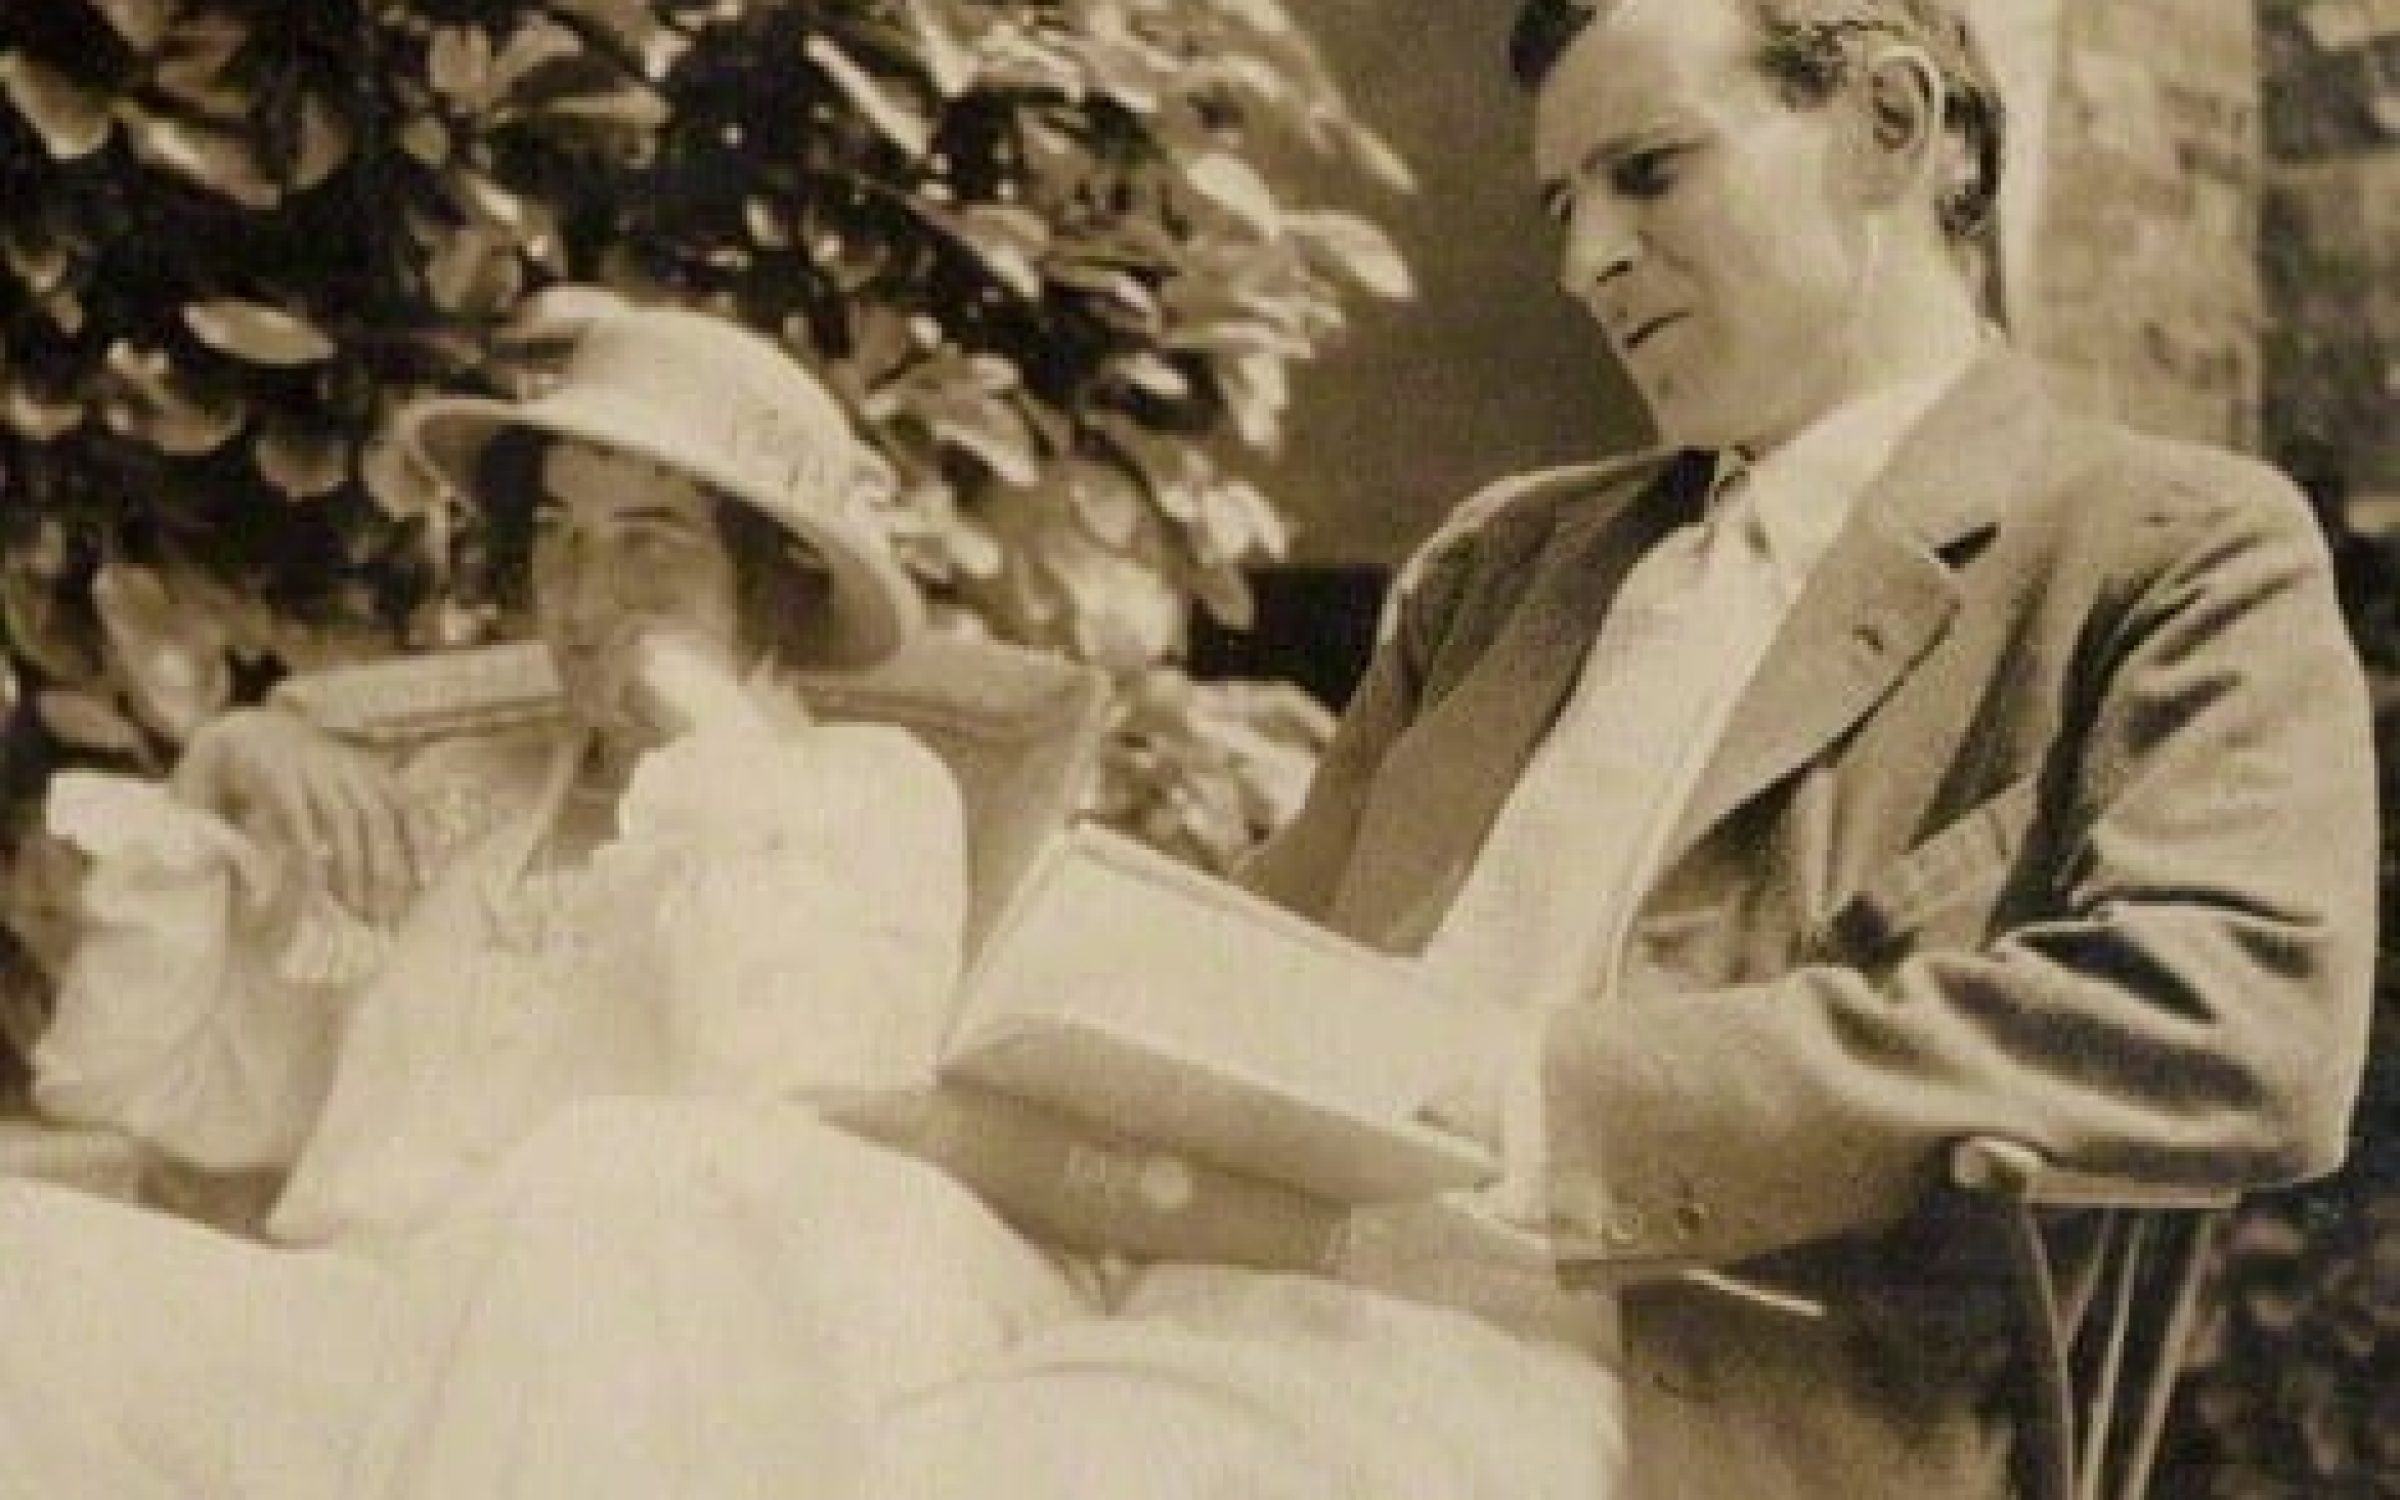 Raymond Asquith and his wife in 1913 via Lady Ottoline Morrell, Public domain, via Wikimedia Commons